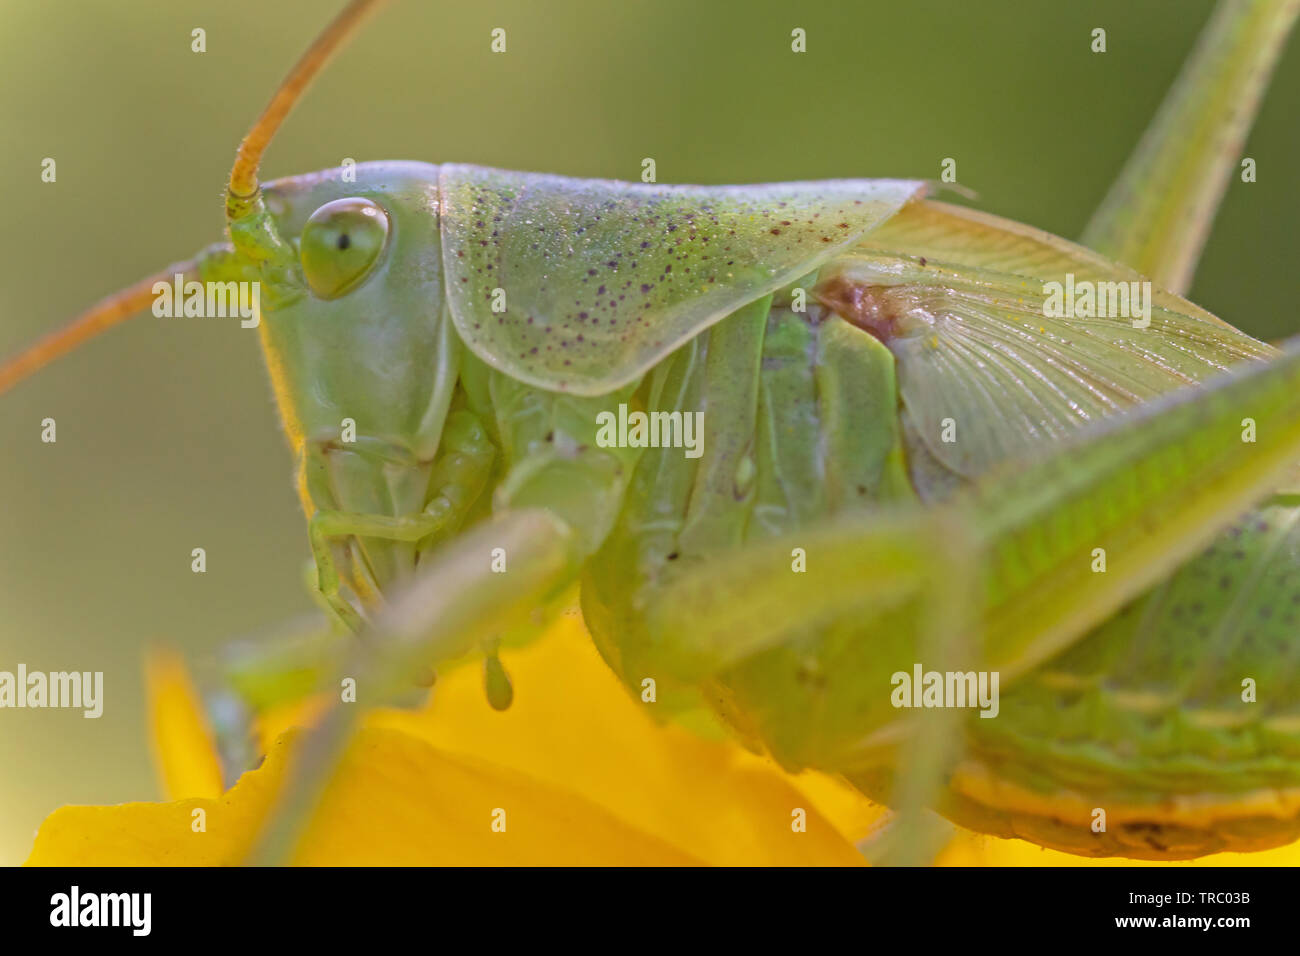 extreme close up of green grasshopper on yellow flower Stock Photo